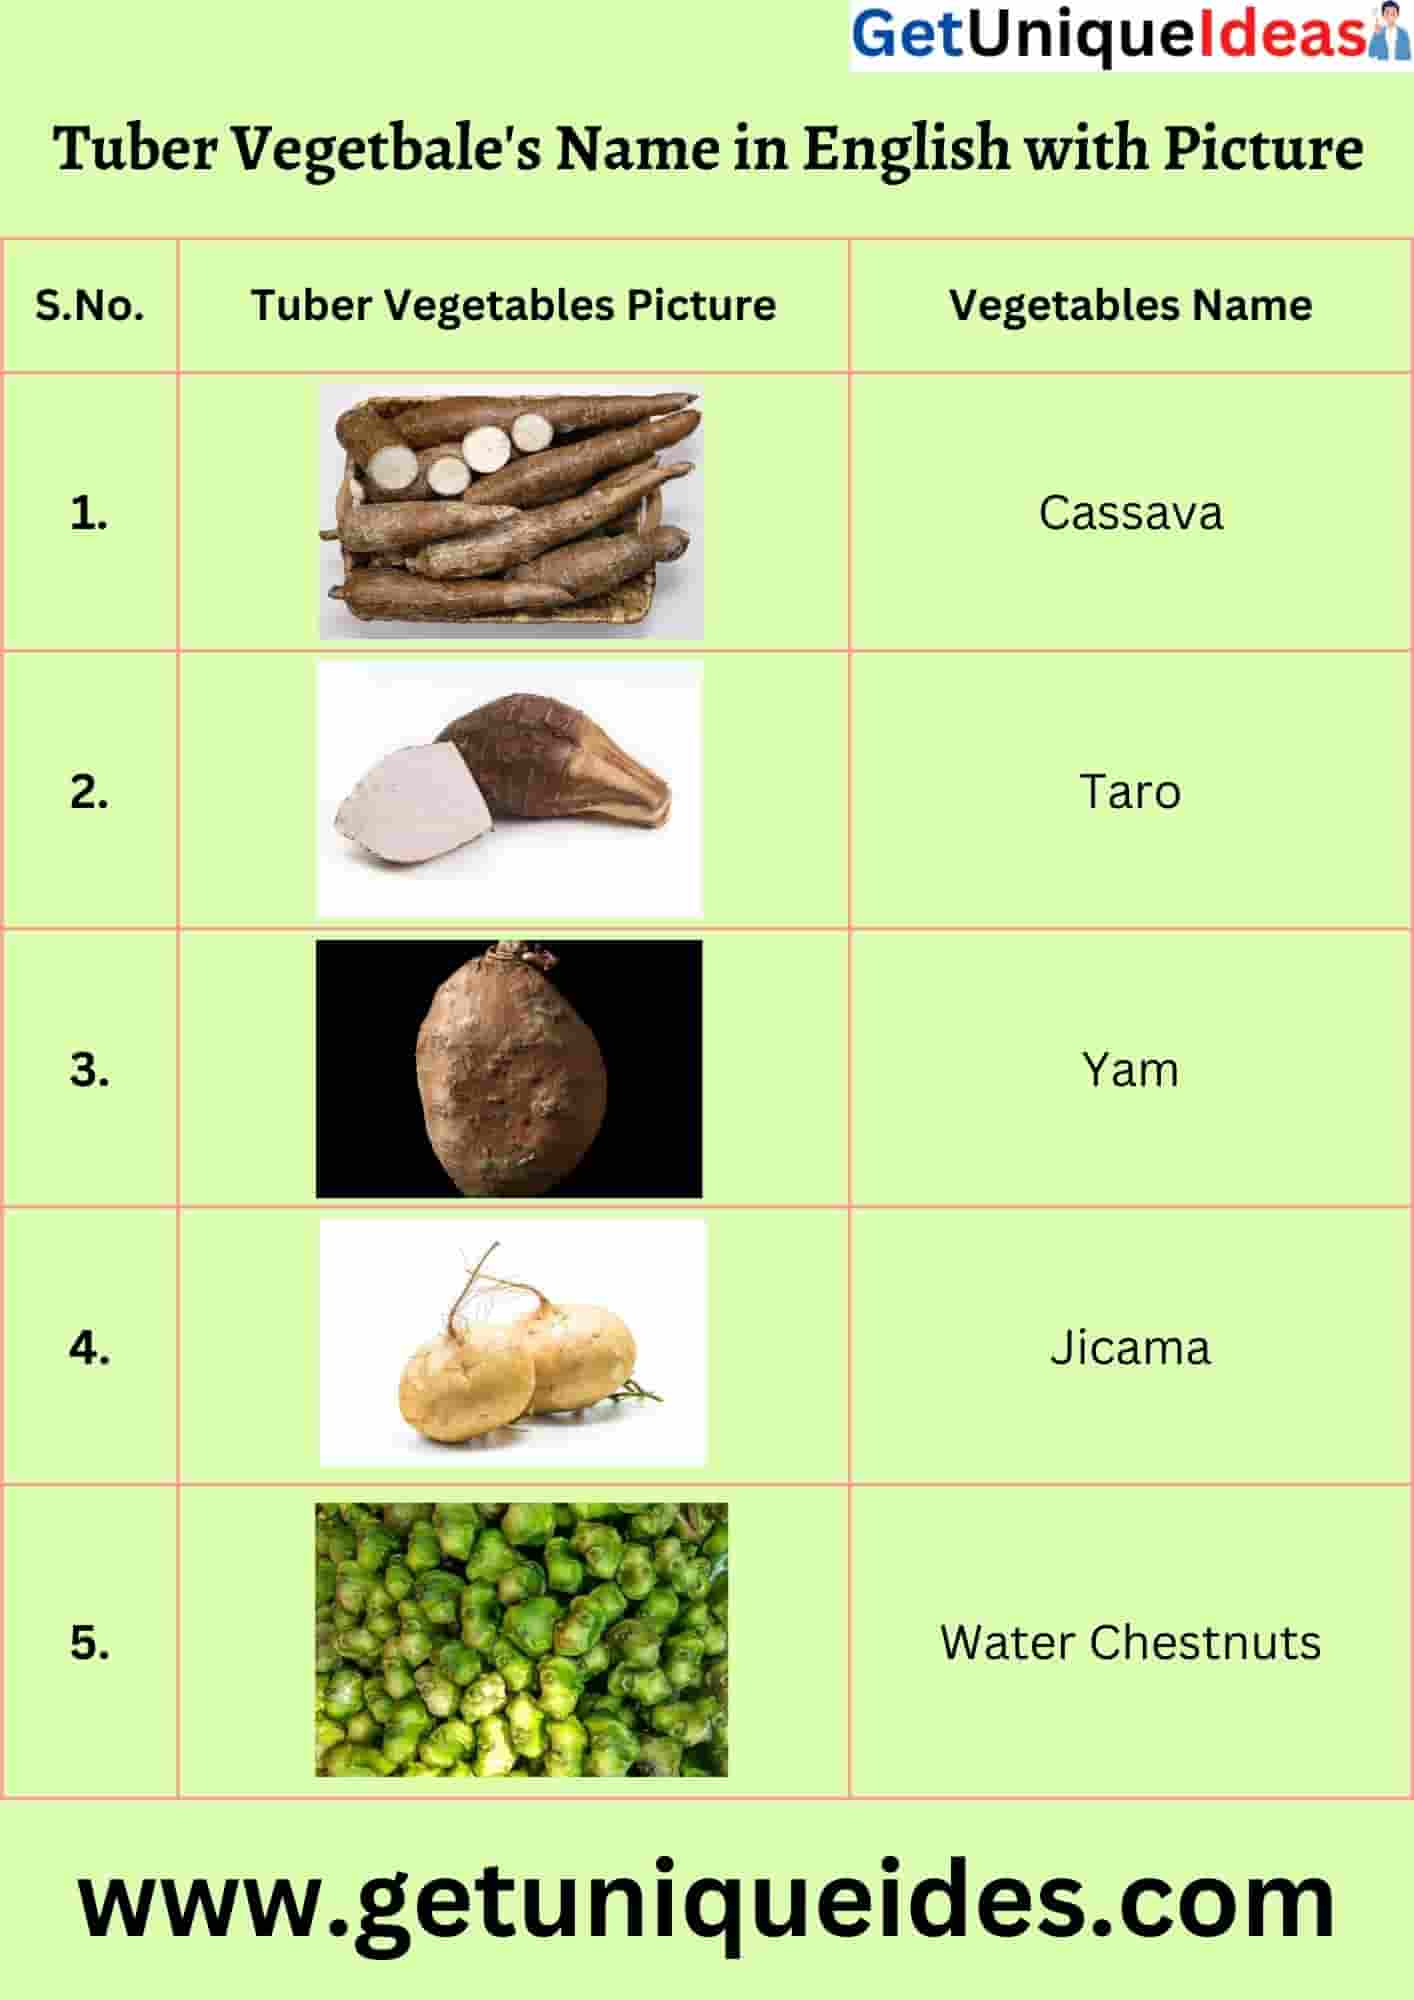 Tuber Vegetable's Name in English with Picture